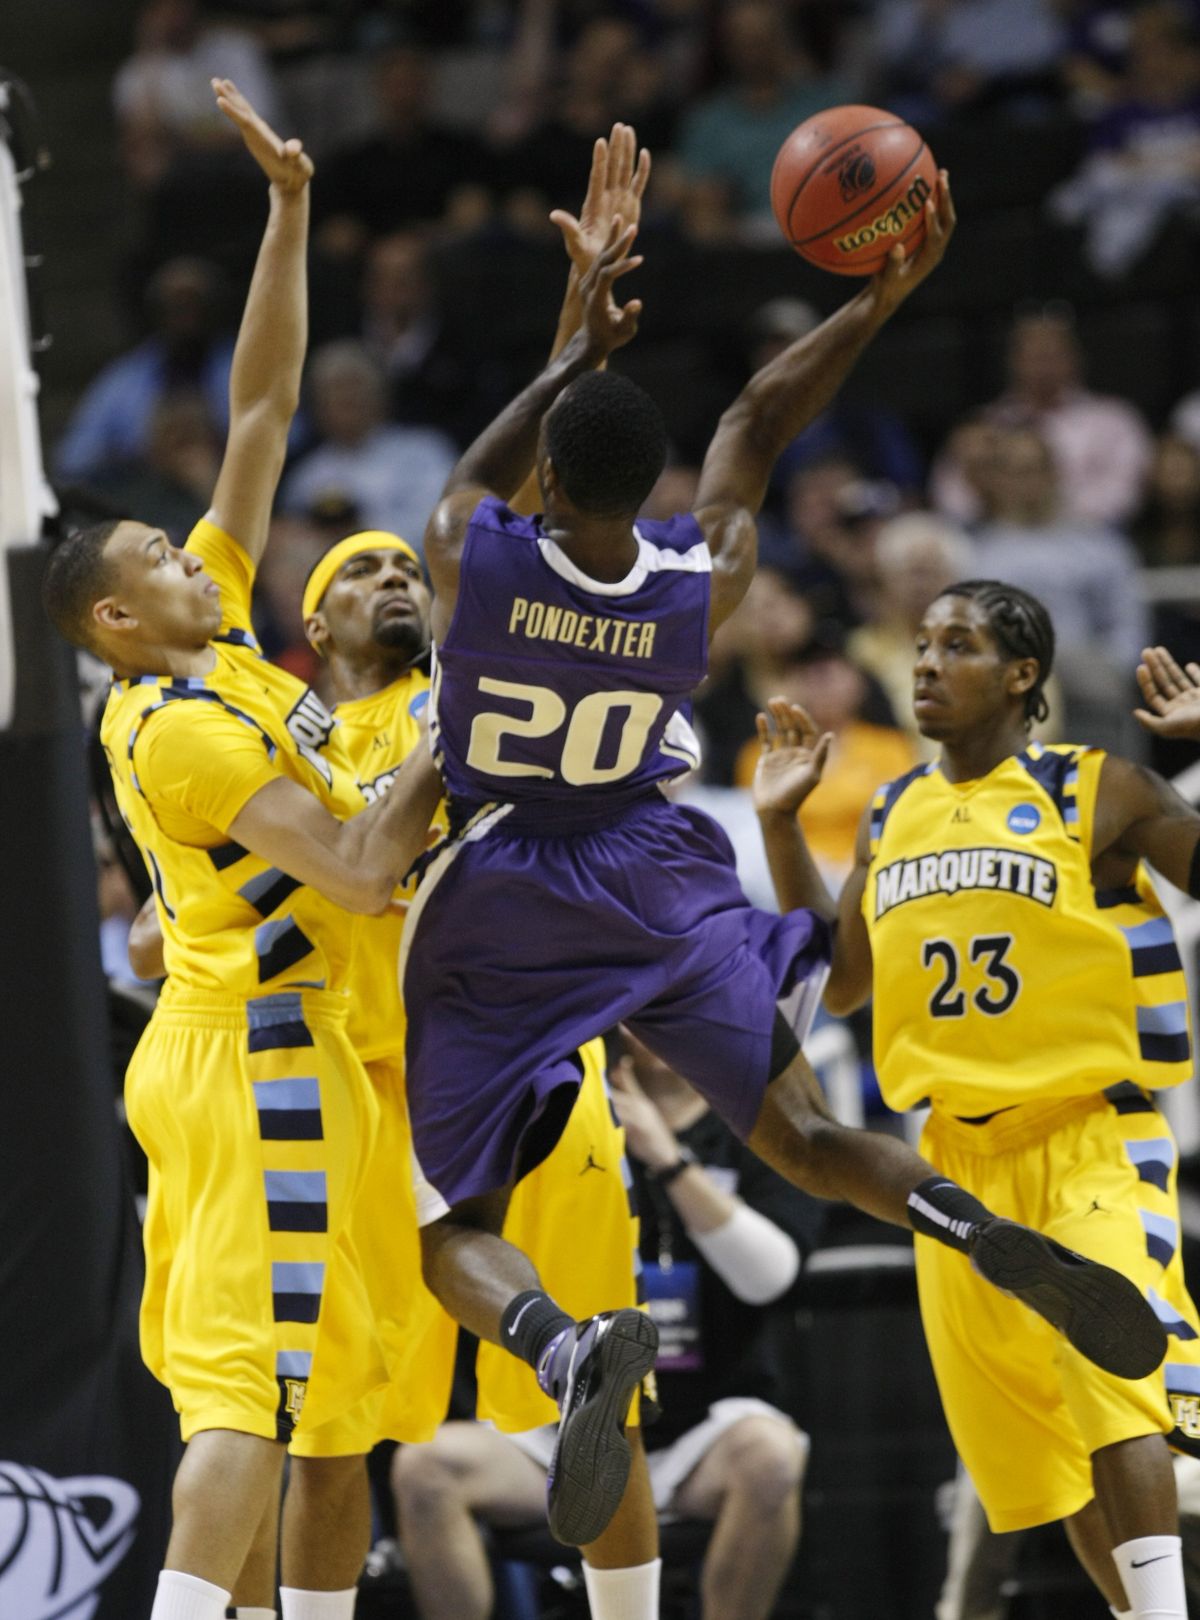 UW’s Quincy Pondexter drives against, left to right, Joseph Fulce, Lazar Hayward and Dwight Buycks.  (Associated Press)